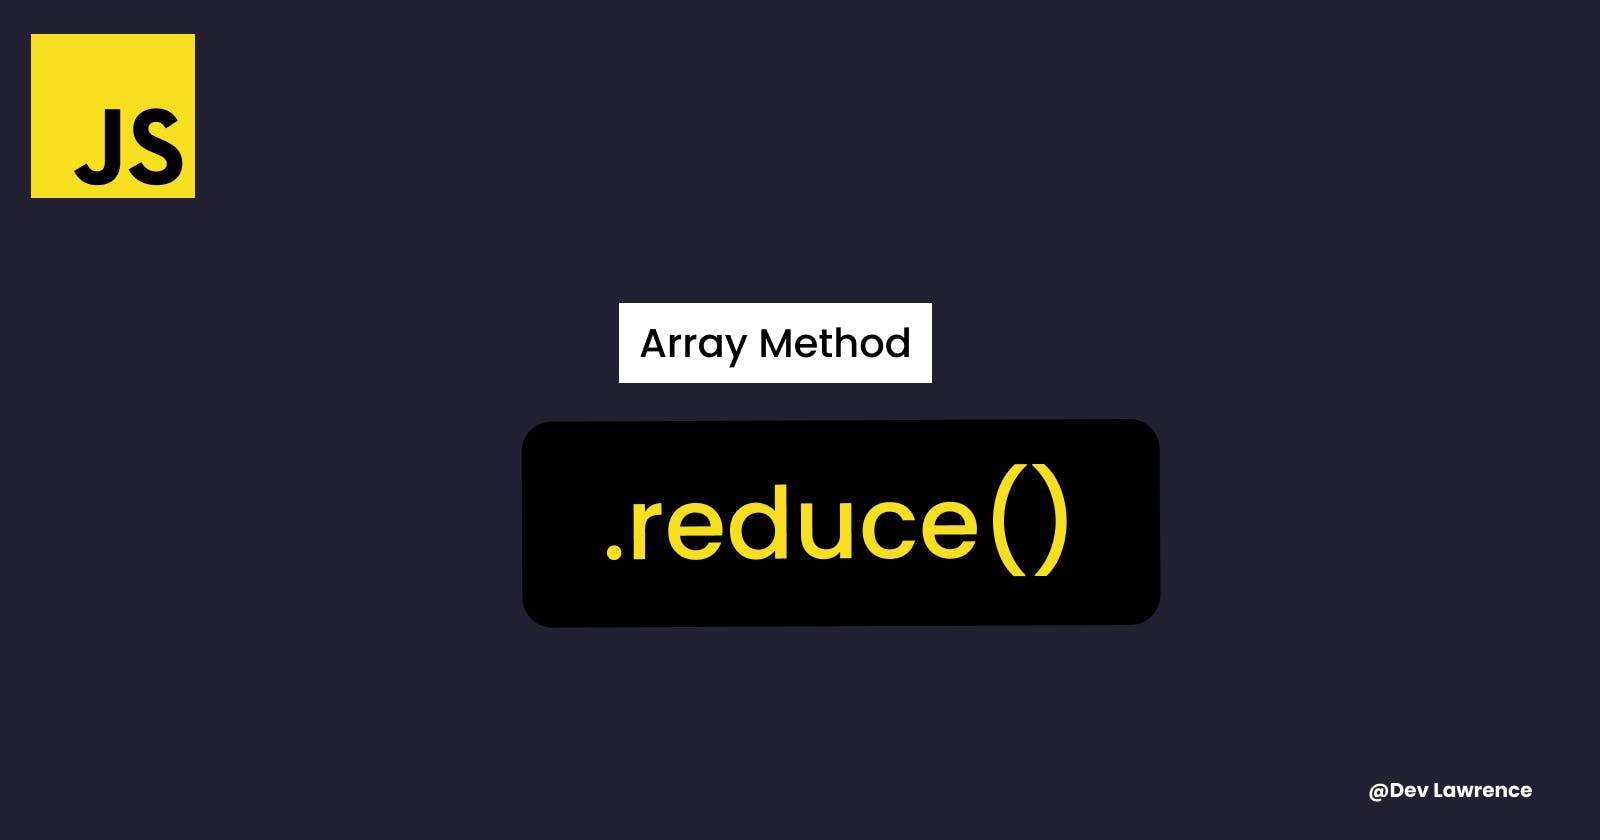 Everything you need to know about the reduce() method